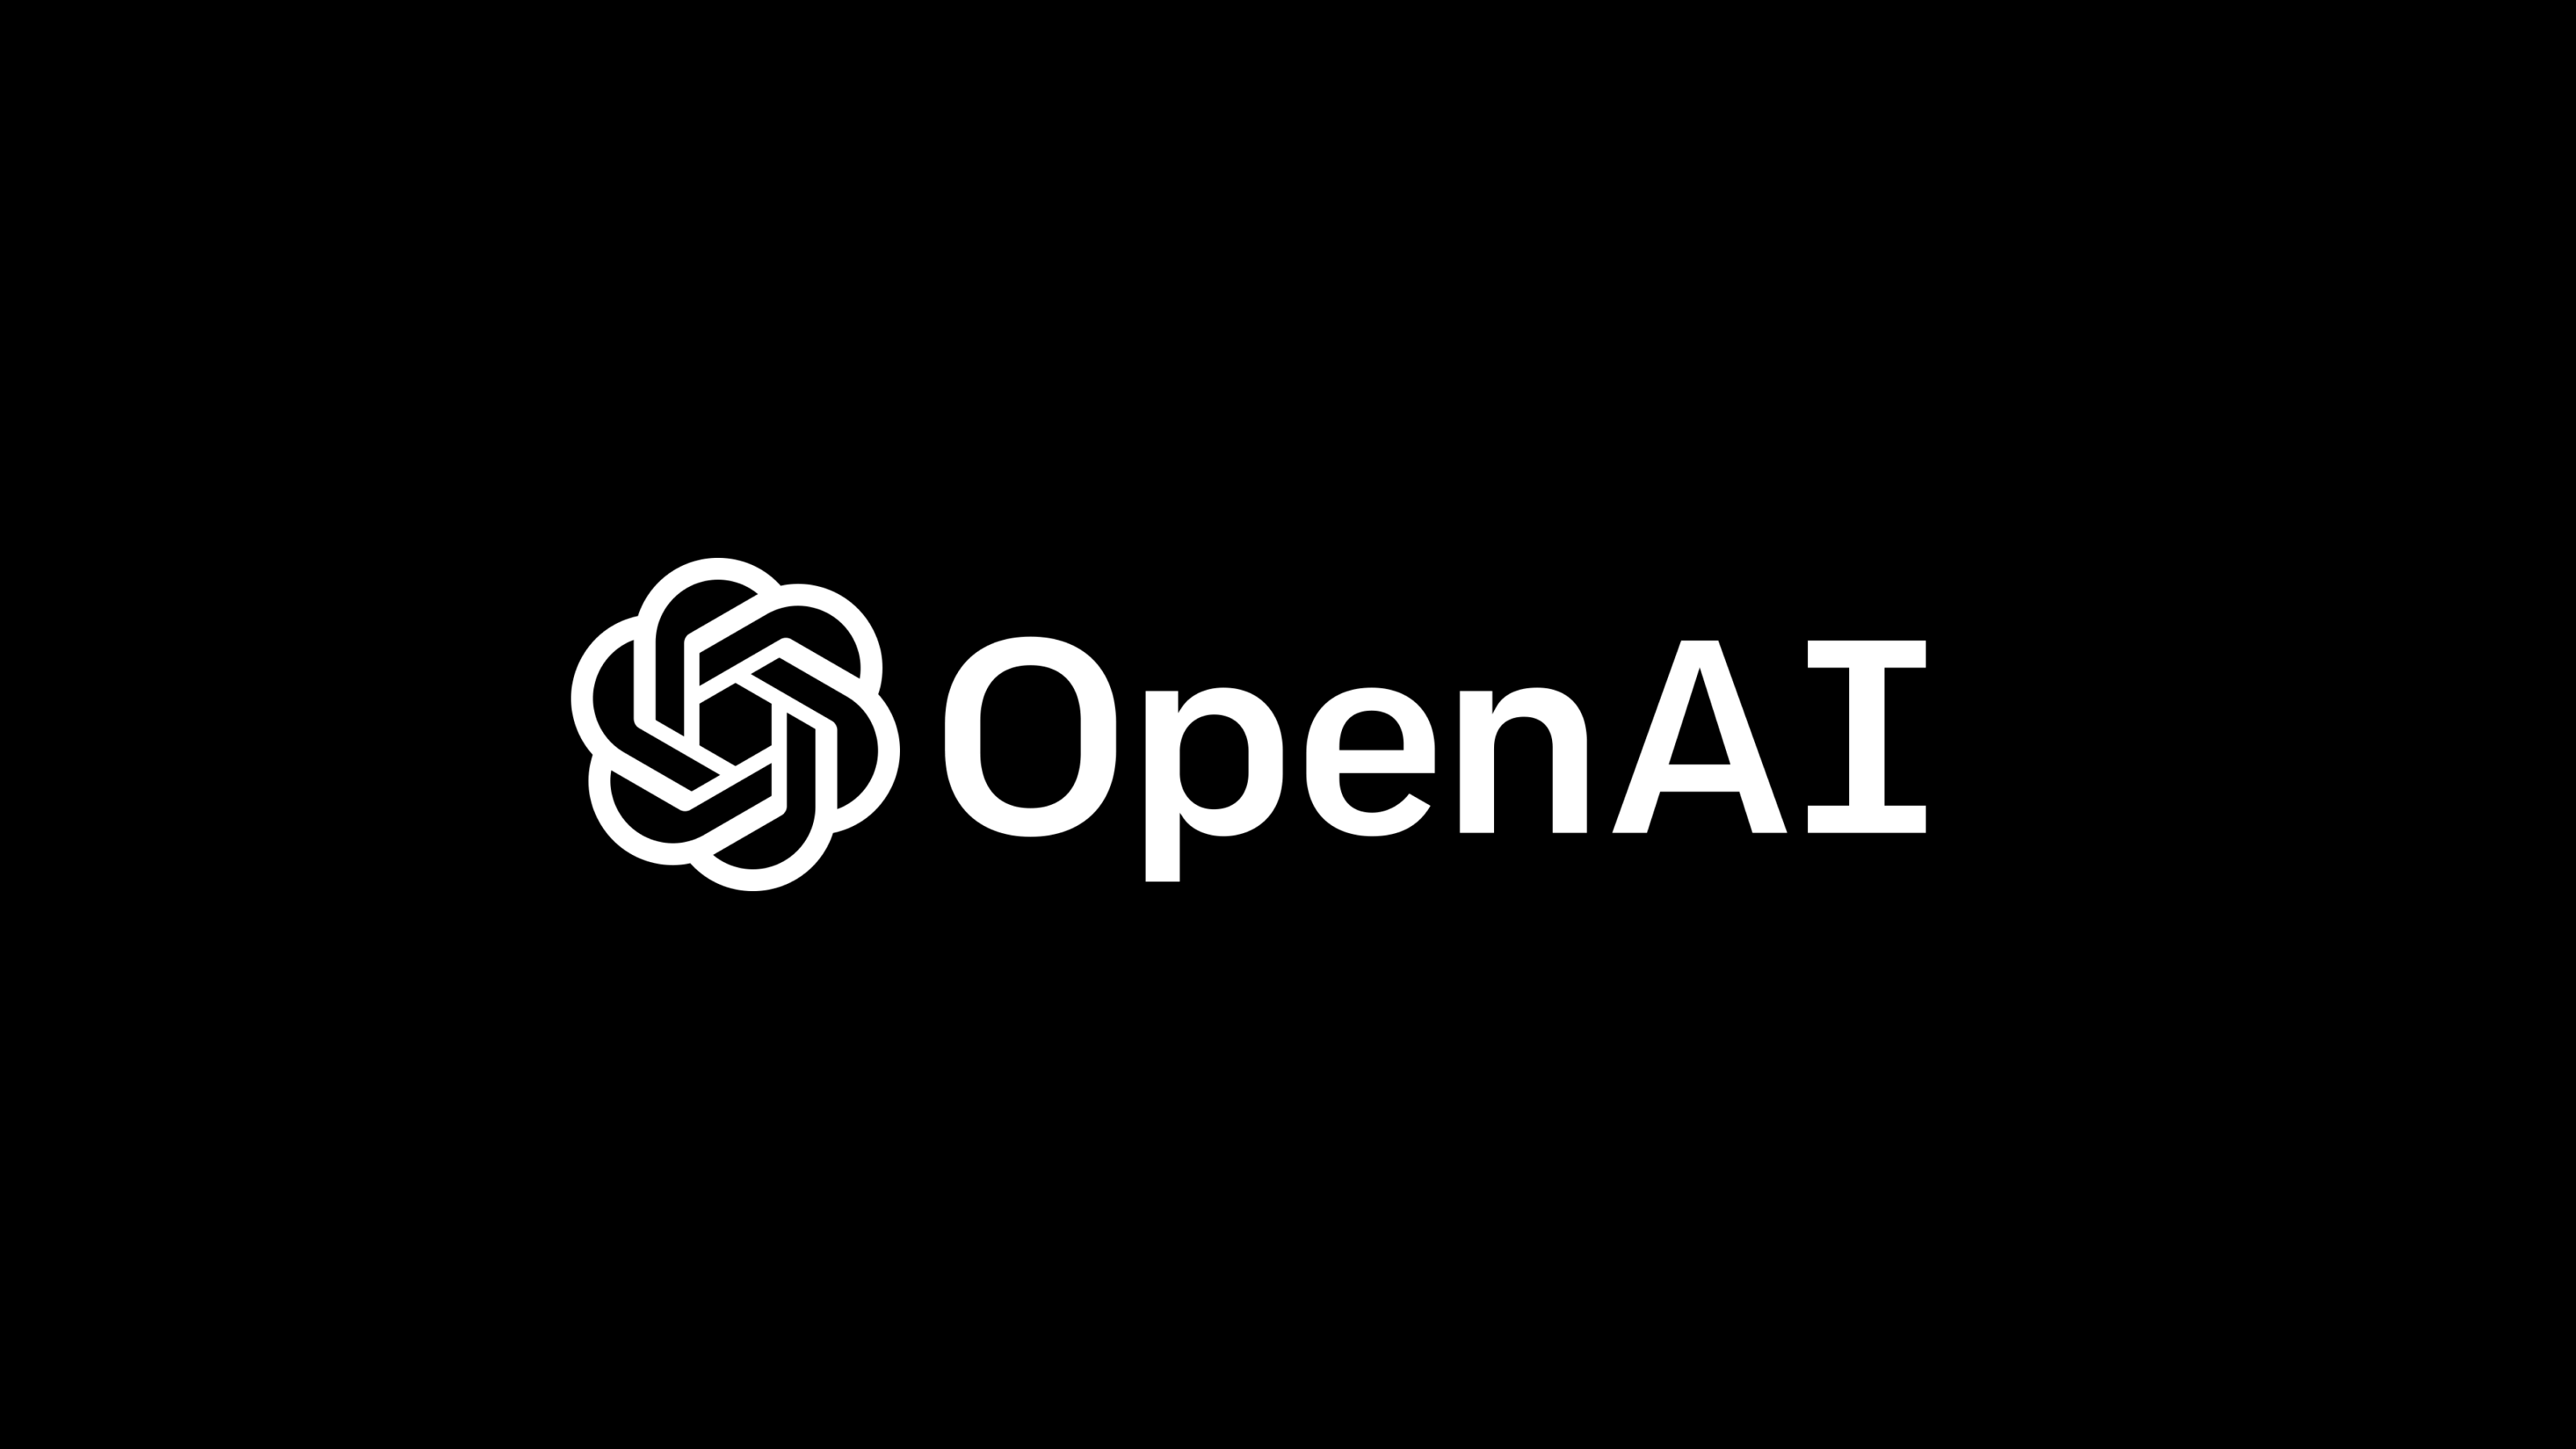 Take advantage of chat.openai.com while developing solutions!